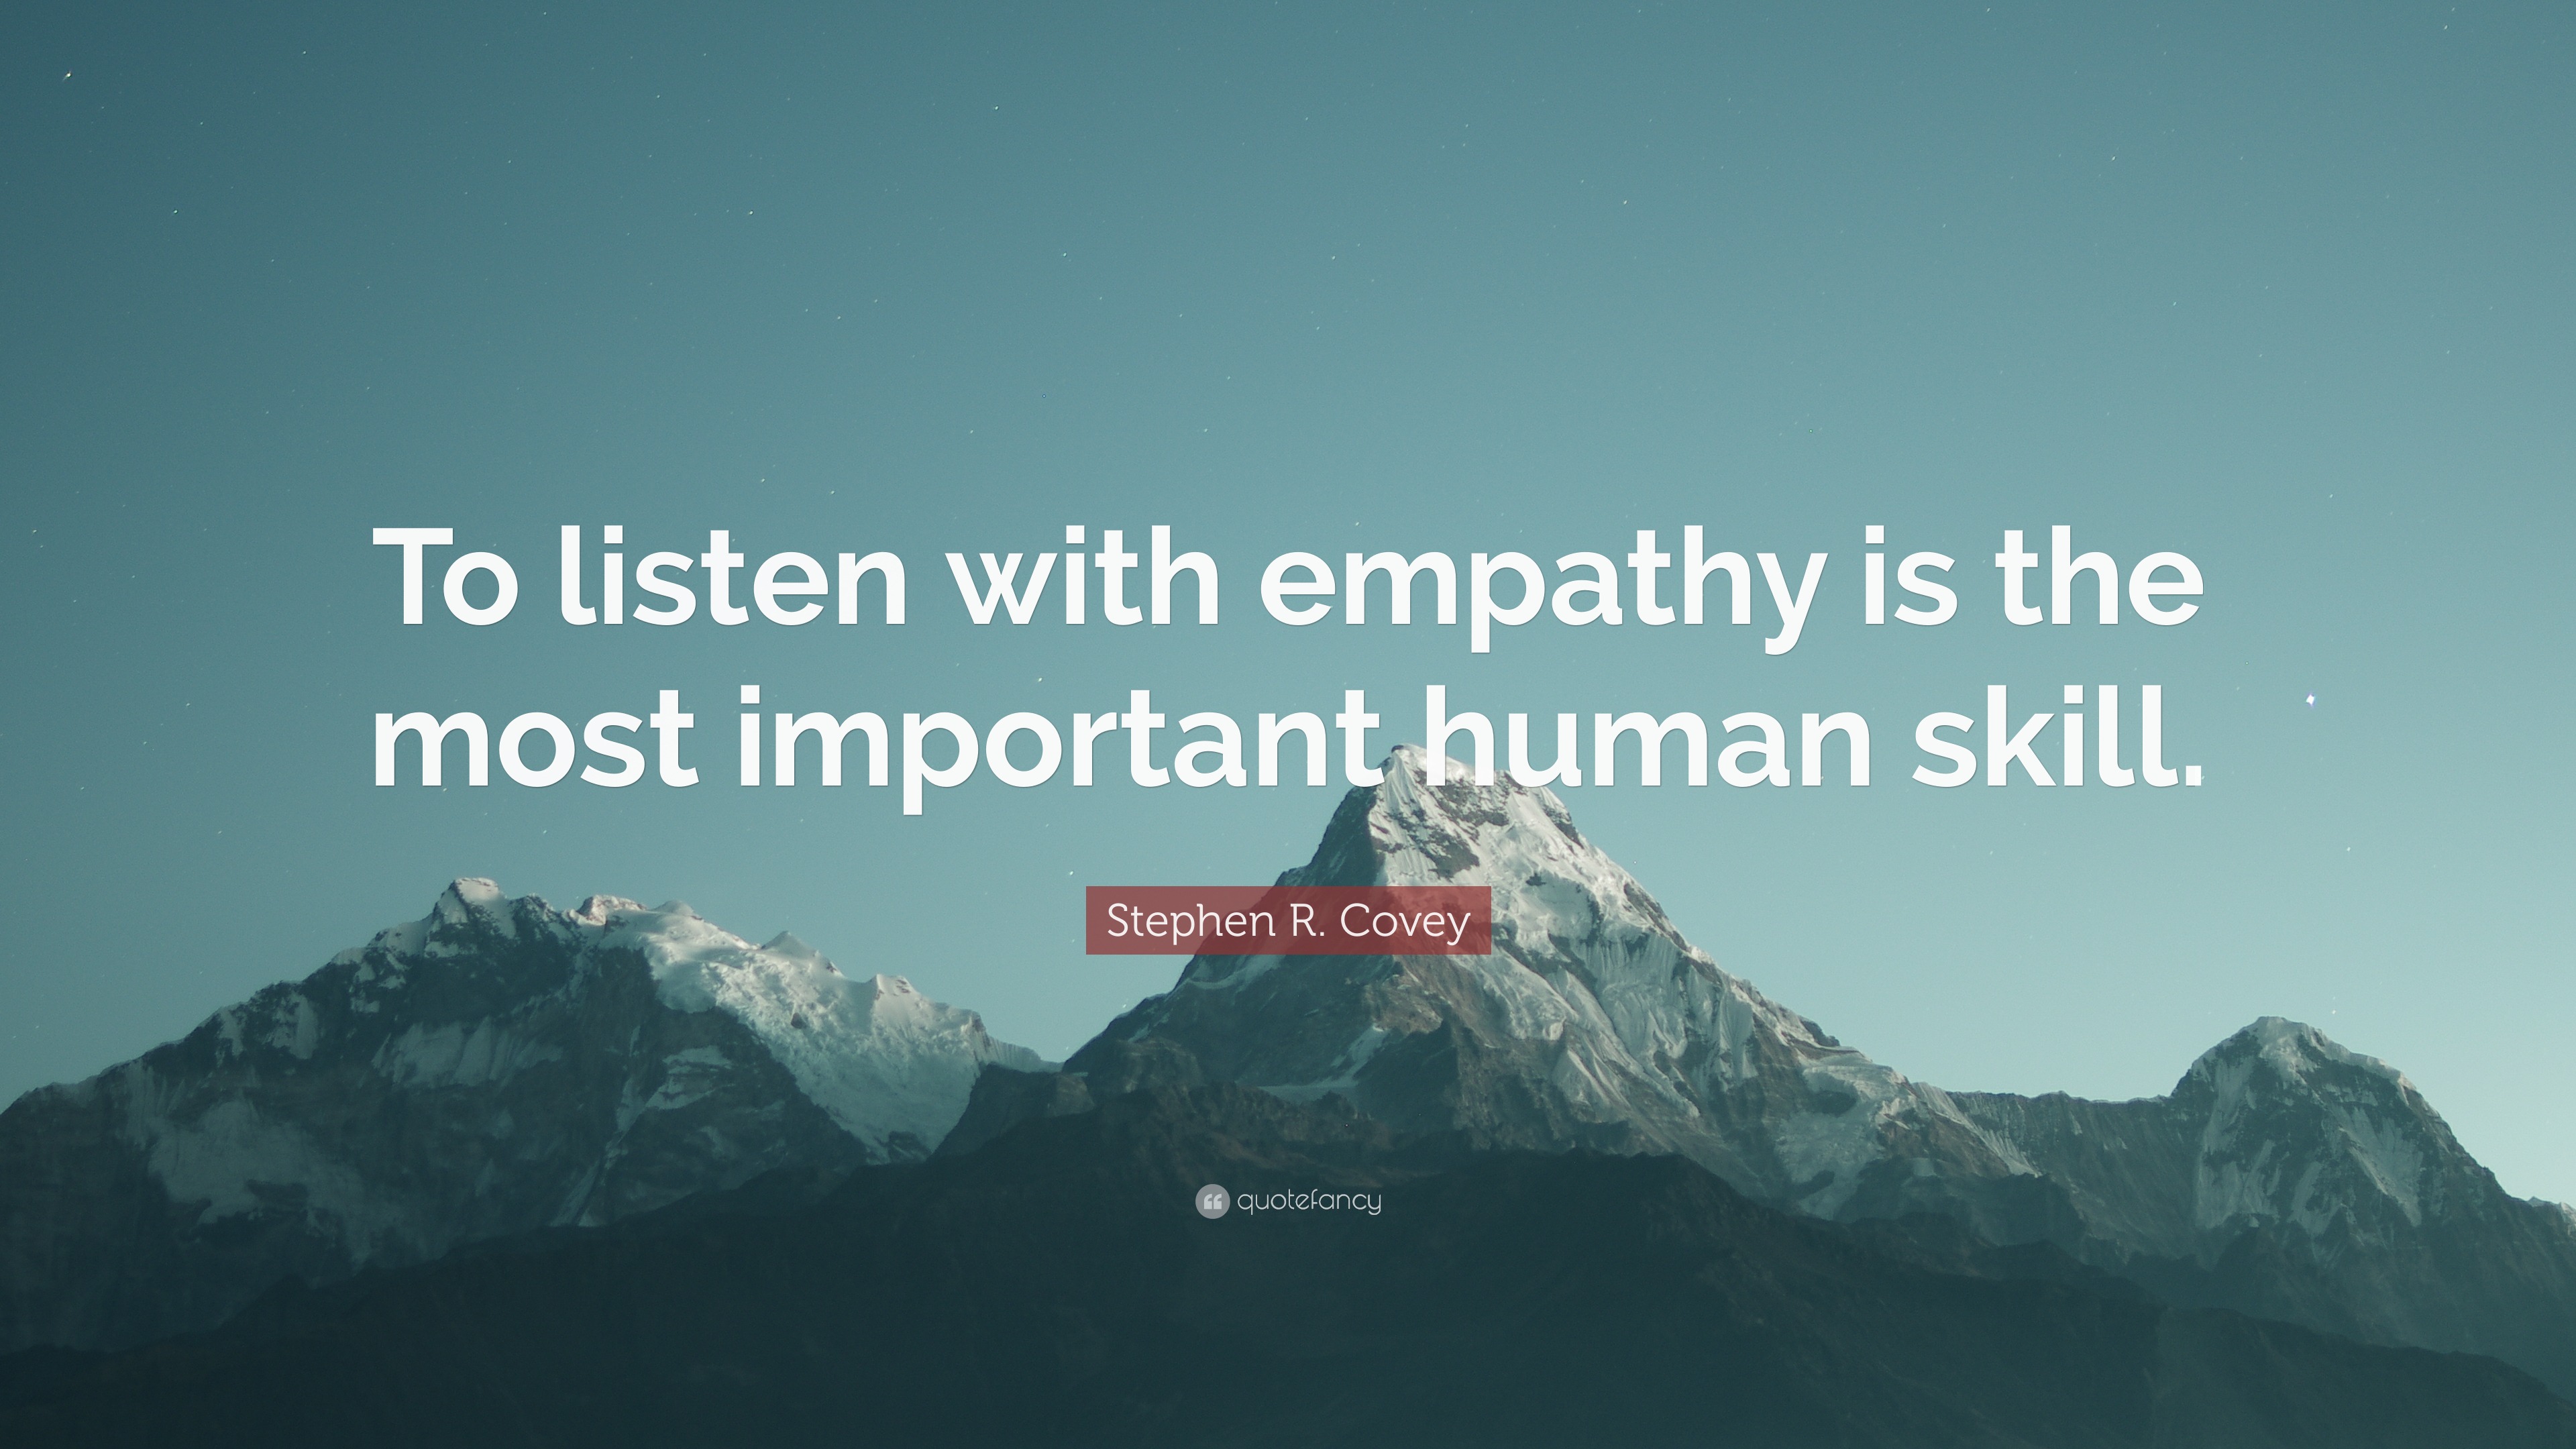 stephen covey listening quotes